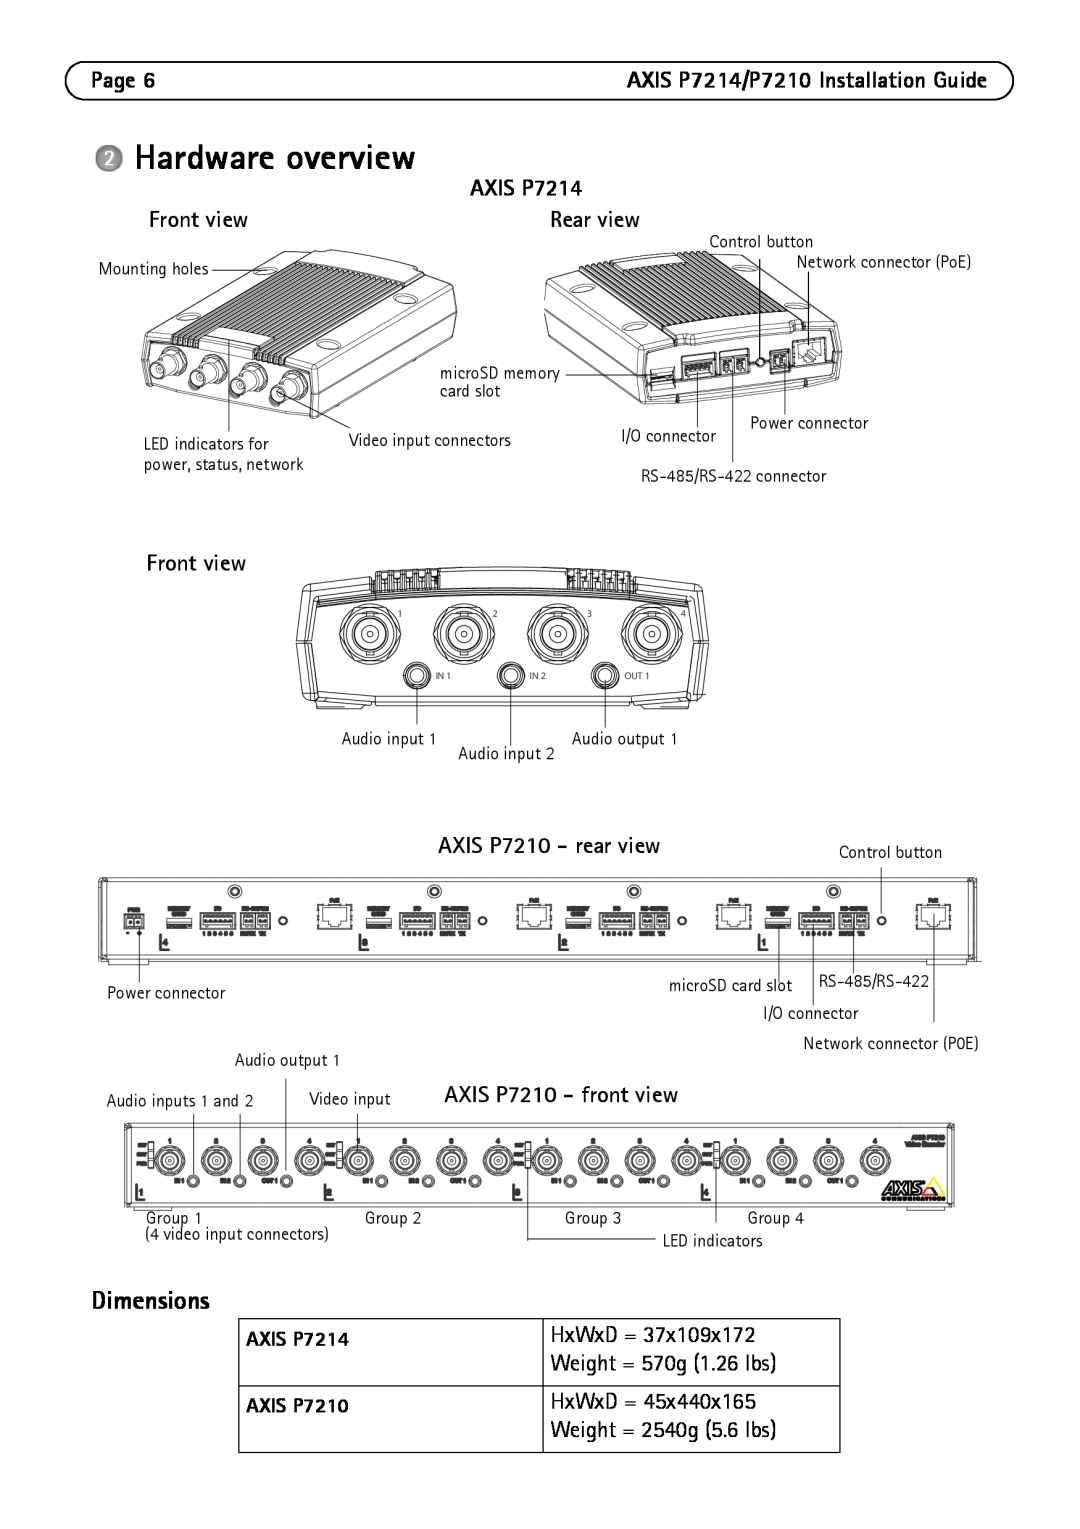 Axis Communications P7214/P7210 manual Hardware overview, Dimensions, Page, AXIS P7214, Front view, Rear view, AXIS P7210 